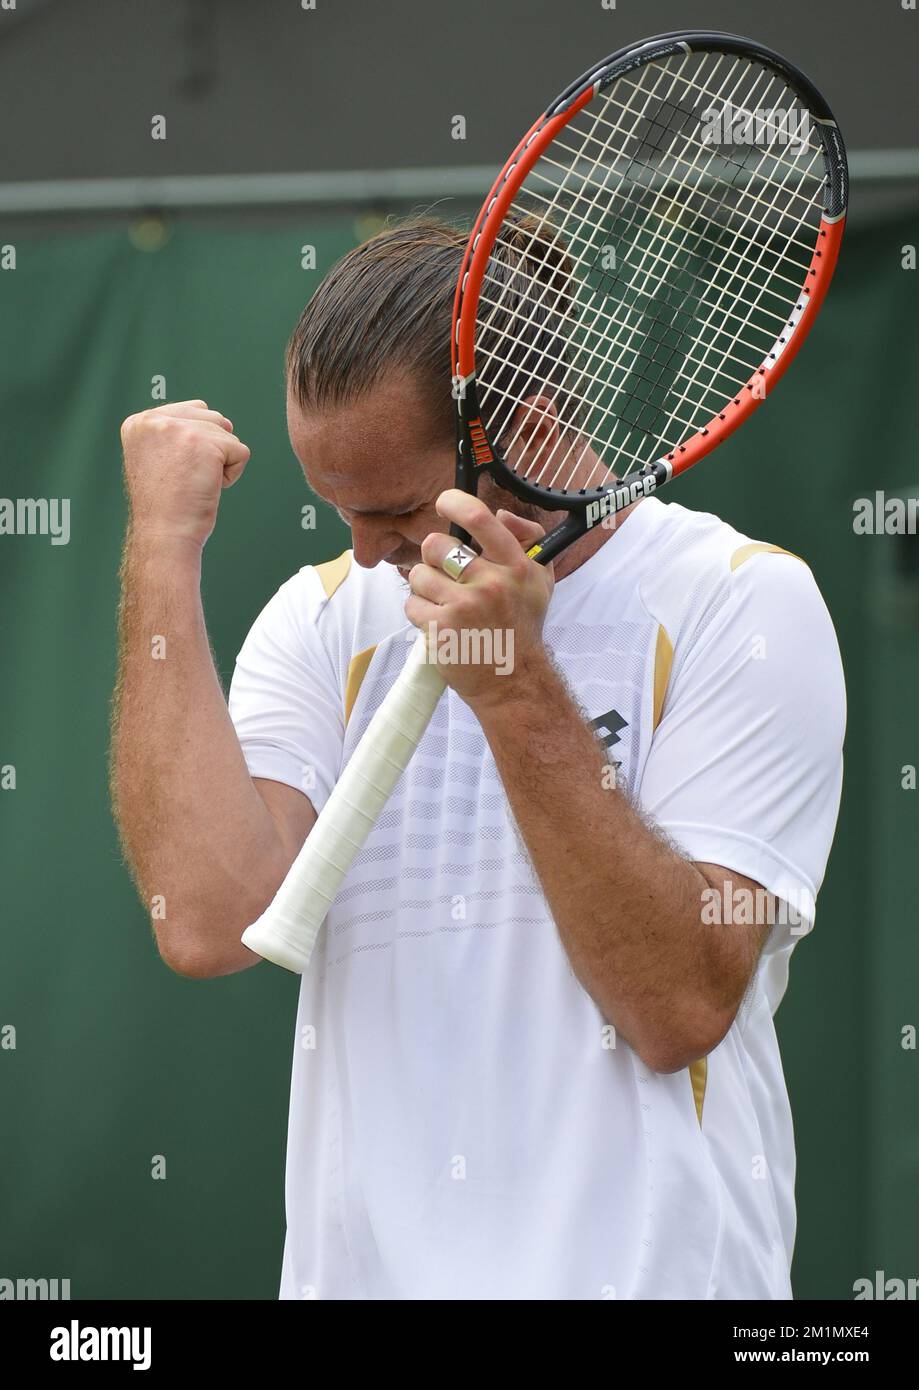 20120628 - LONDON, UNITED KINGDOM: Belgian Xavier Malisse celebrates during the second round match of Belgian Xavier Malisse (ATP 75) against French Gilles Simon (ATP 13) at the men's singles at the 2012 Wimbledon grand slam tennis tournament at the All England Tennis Club, in southwest London, Thursday 28 June 2012. Malisse won in three sets: 6-4, 6-4 and 7-6  (7/5). BELGA PHOTO DIRK WAEM Stock Photo